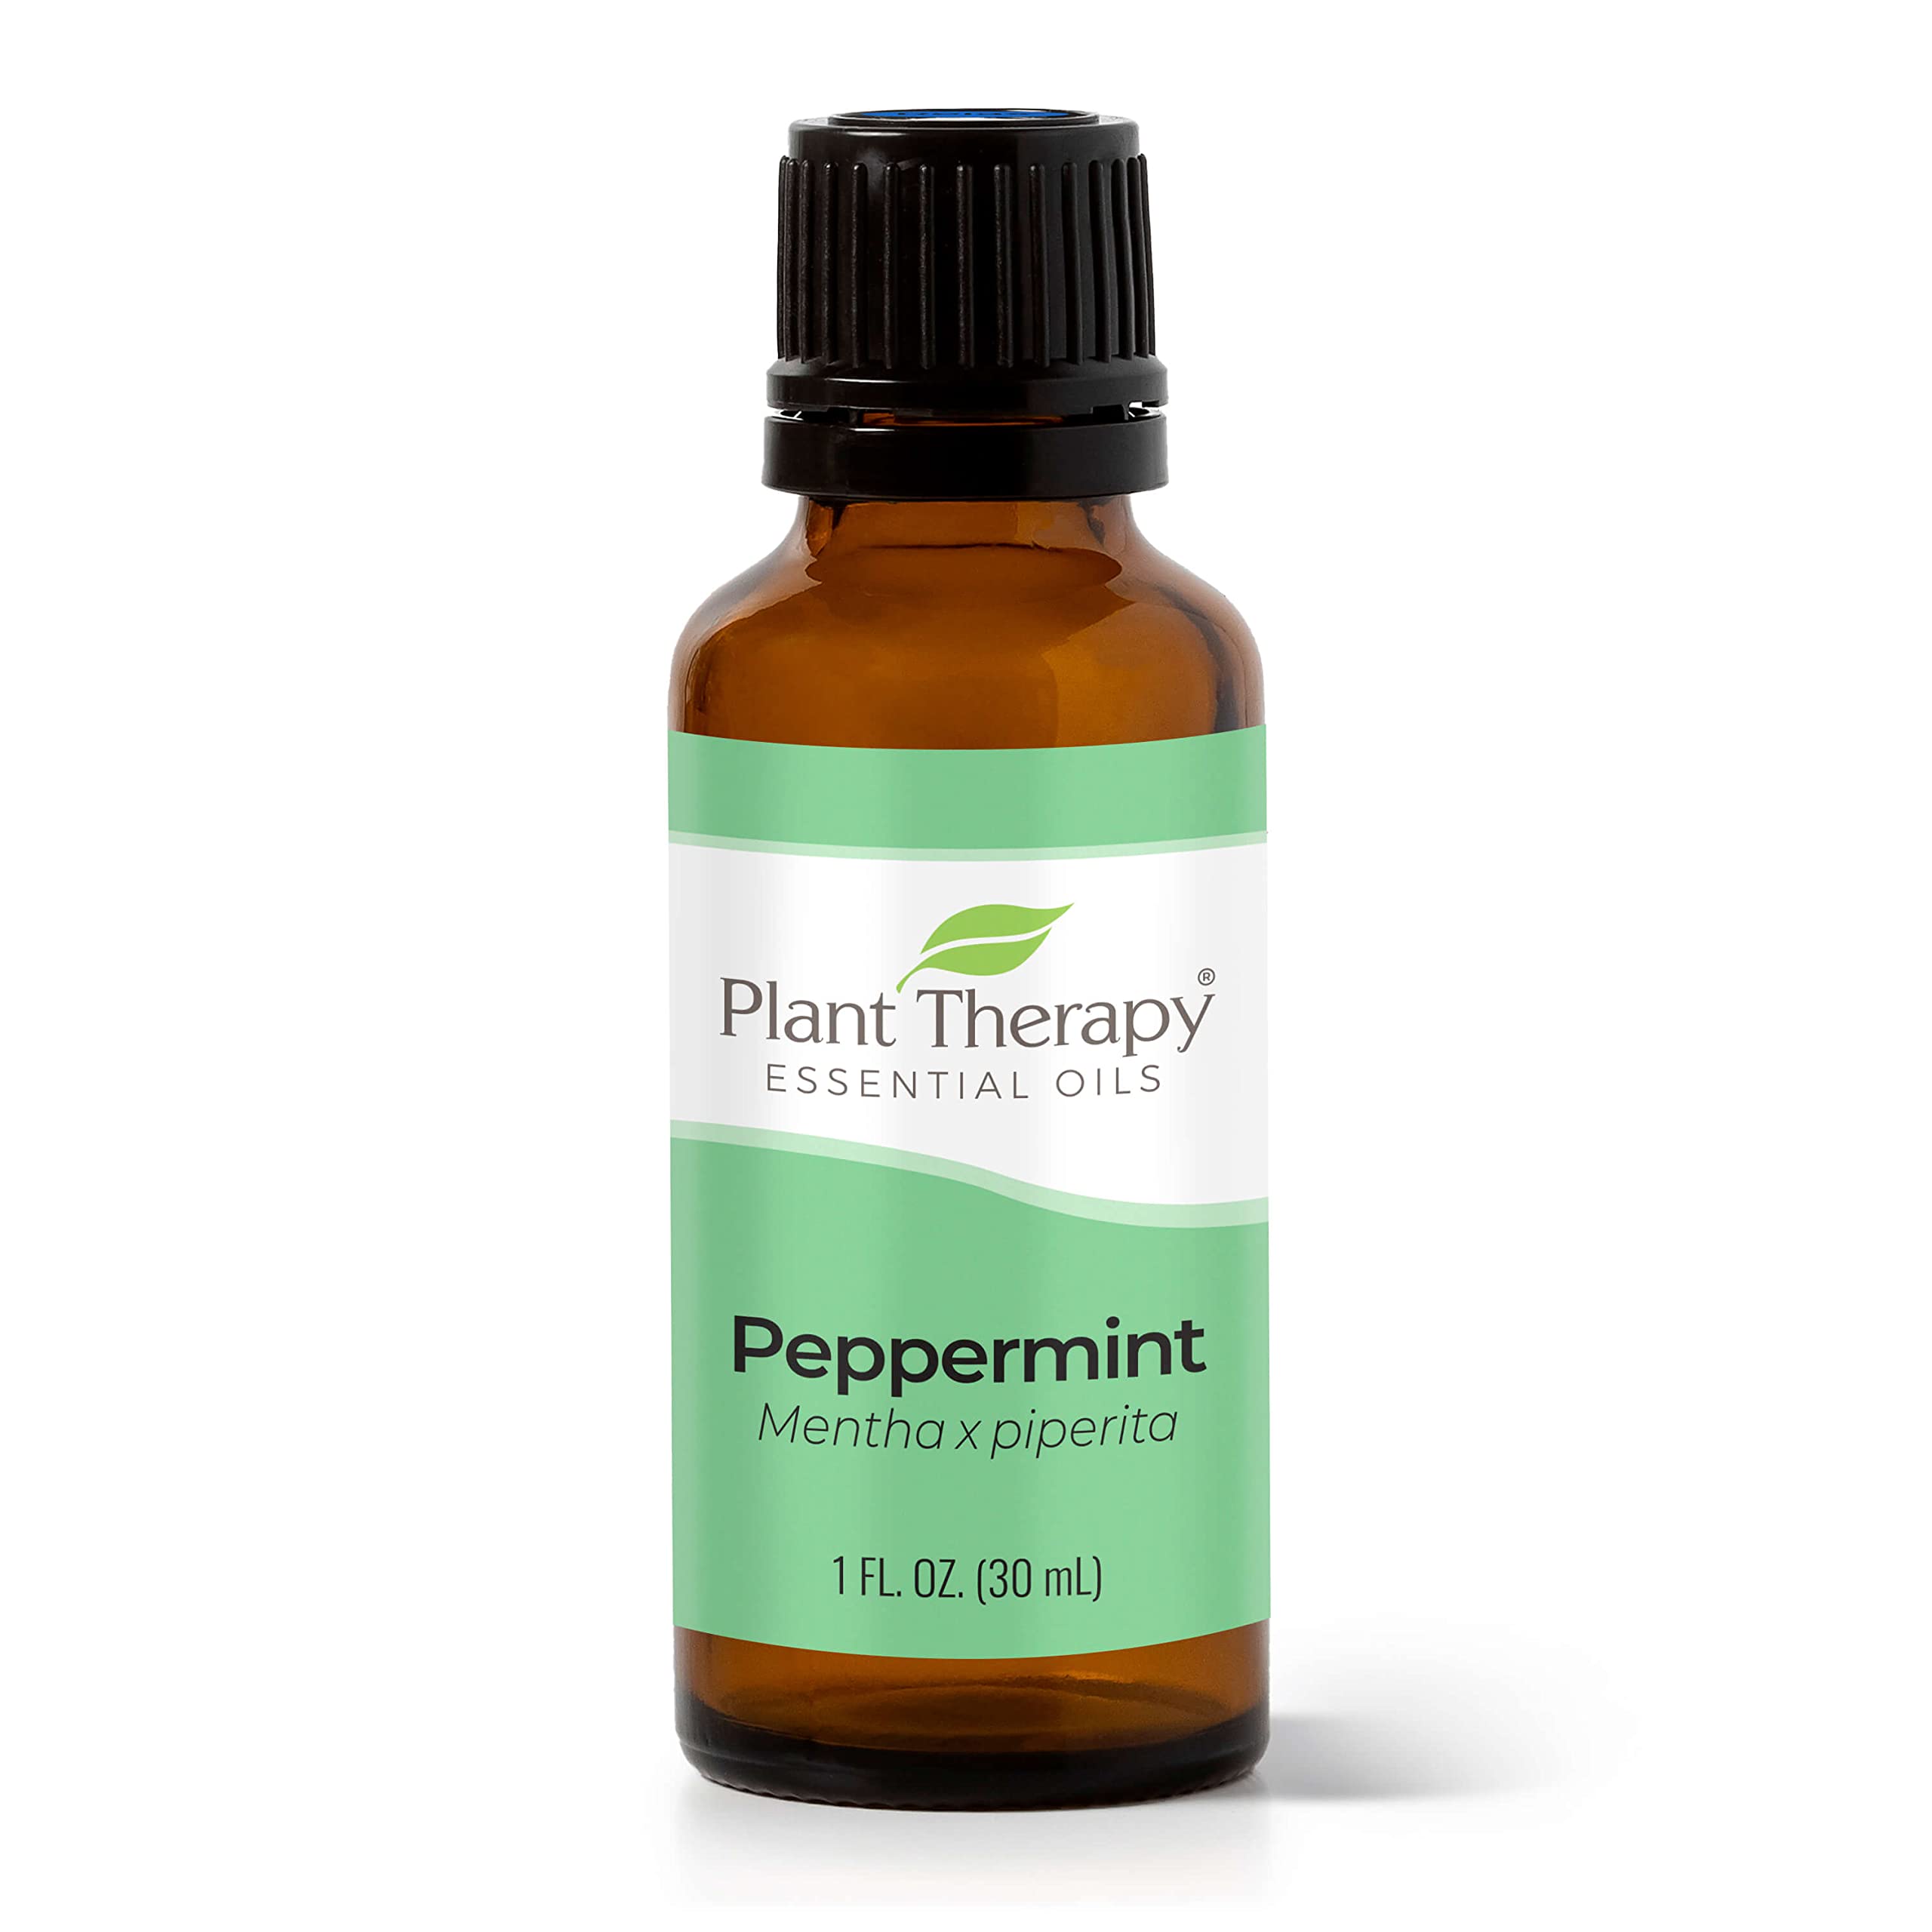 Plant Therapy Peppermint Essential Oil 100% Pure, Undiluted, Natural Aromatherapy, Diffuse & Topical Use, DIY for Energy, Tension, Soothing Massage, Respiratory, & Digestion,Therapeutic Grade 30 mL (1 oz)